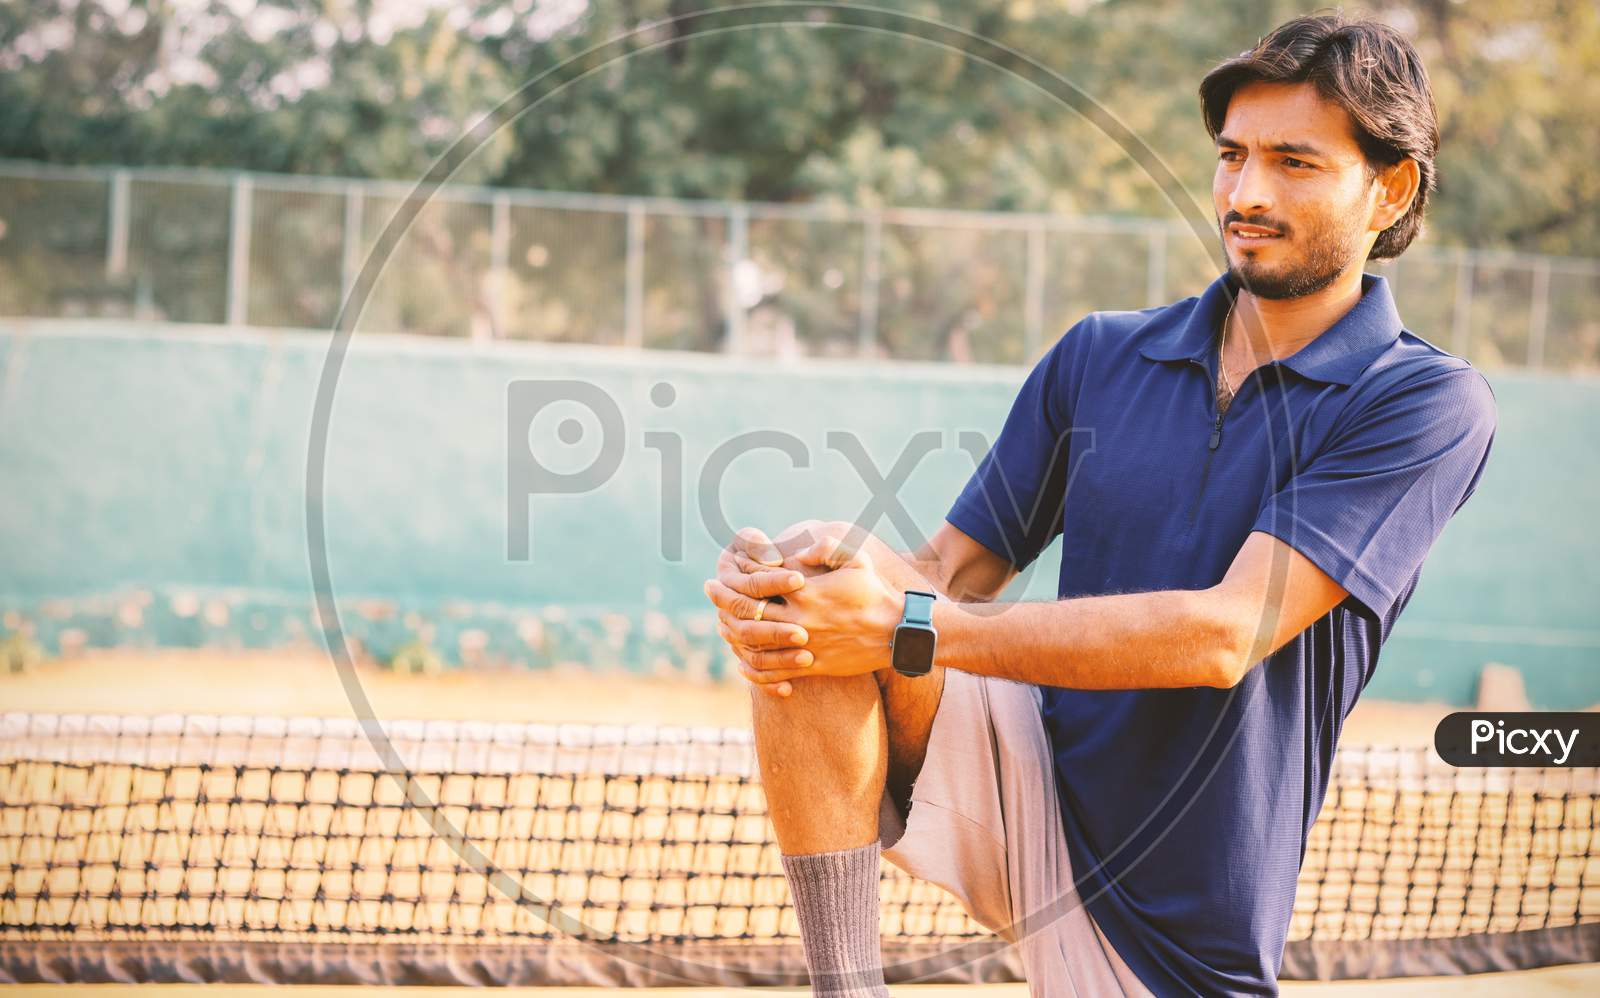 Young Tennis Player Stretches Legs Before Playing At Tennis Court - Concept Of Warming Up Before Playing Any Sports.